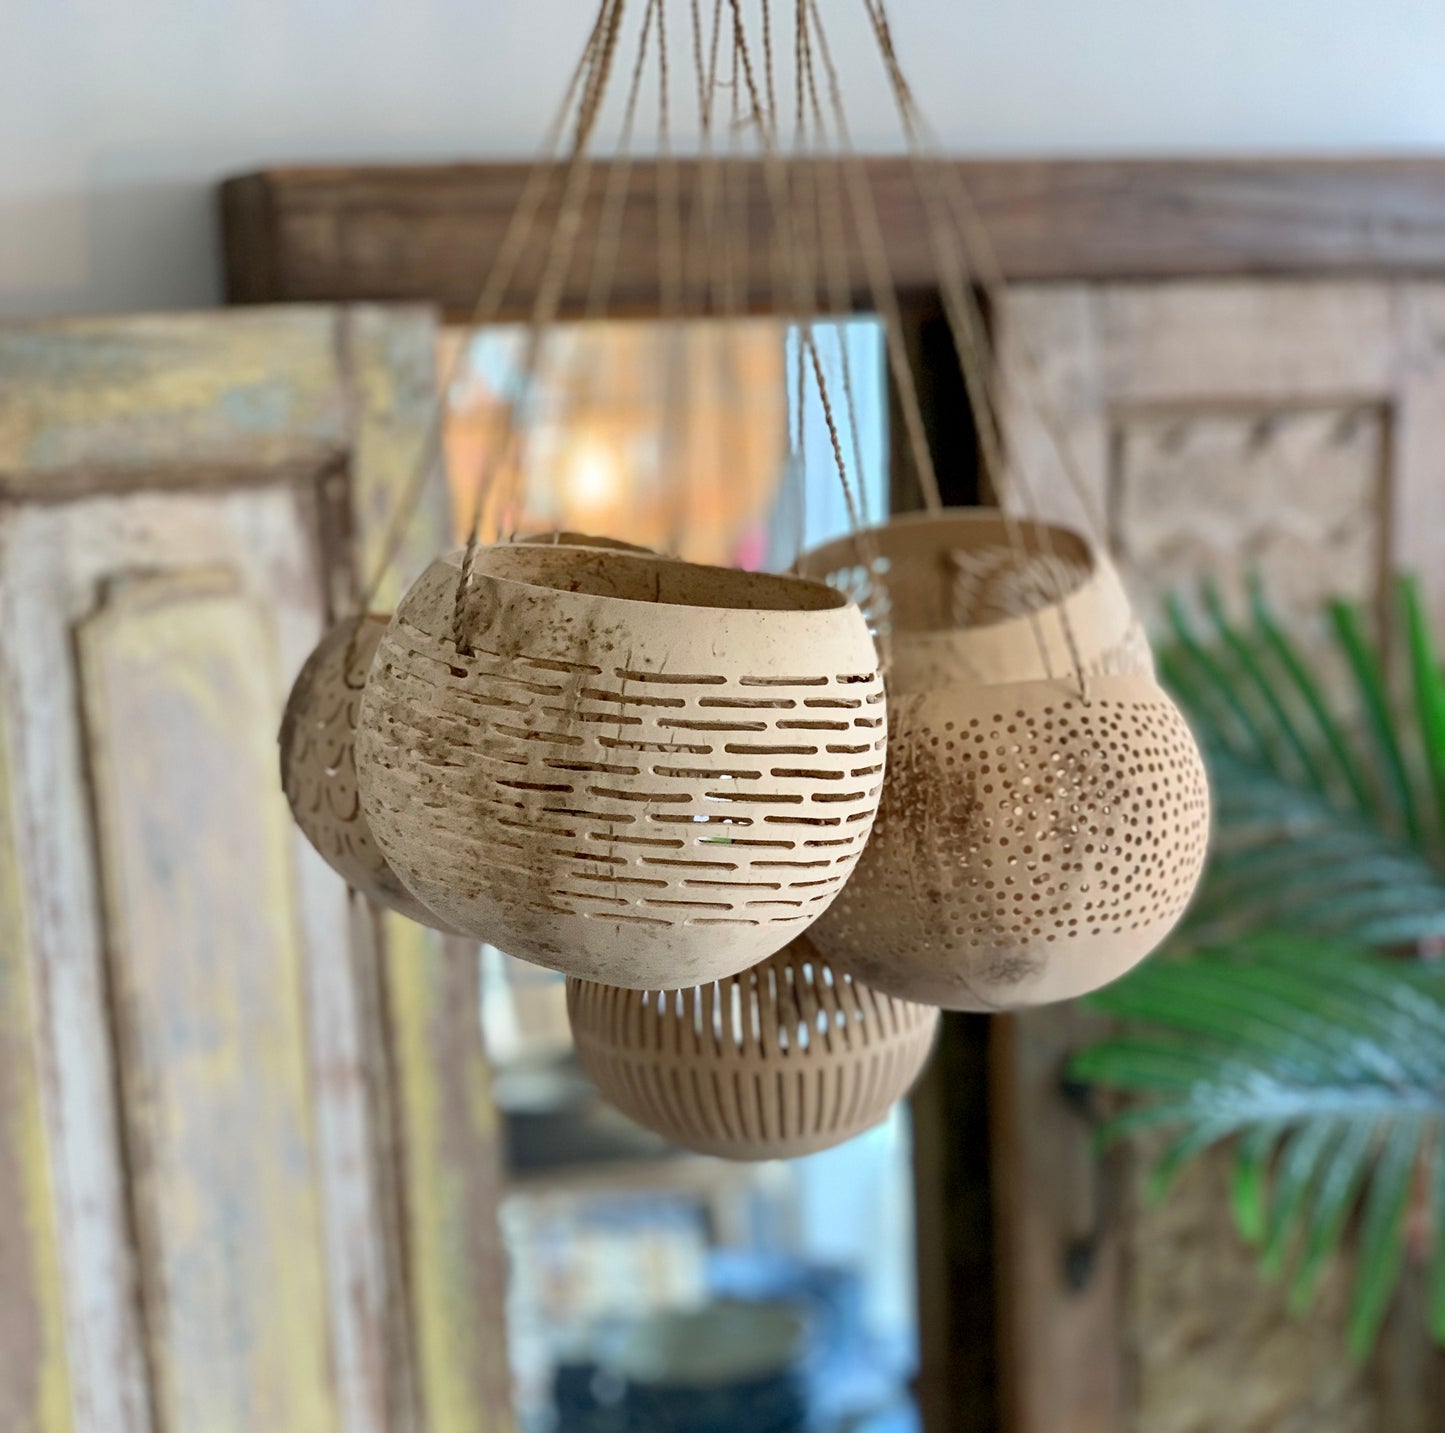 Hanging painted coconut